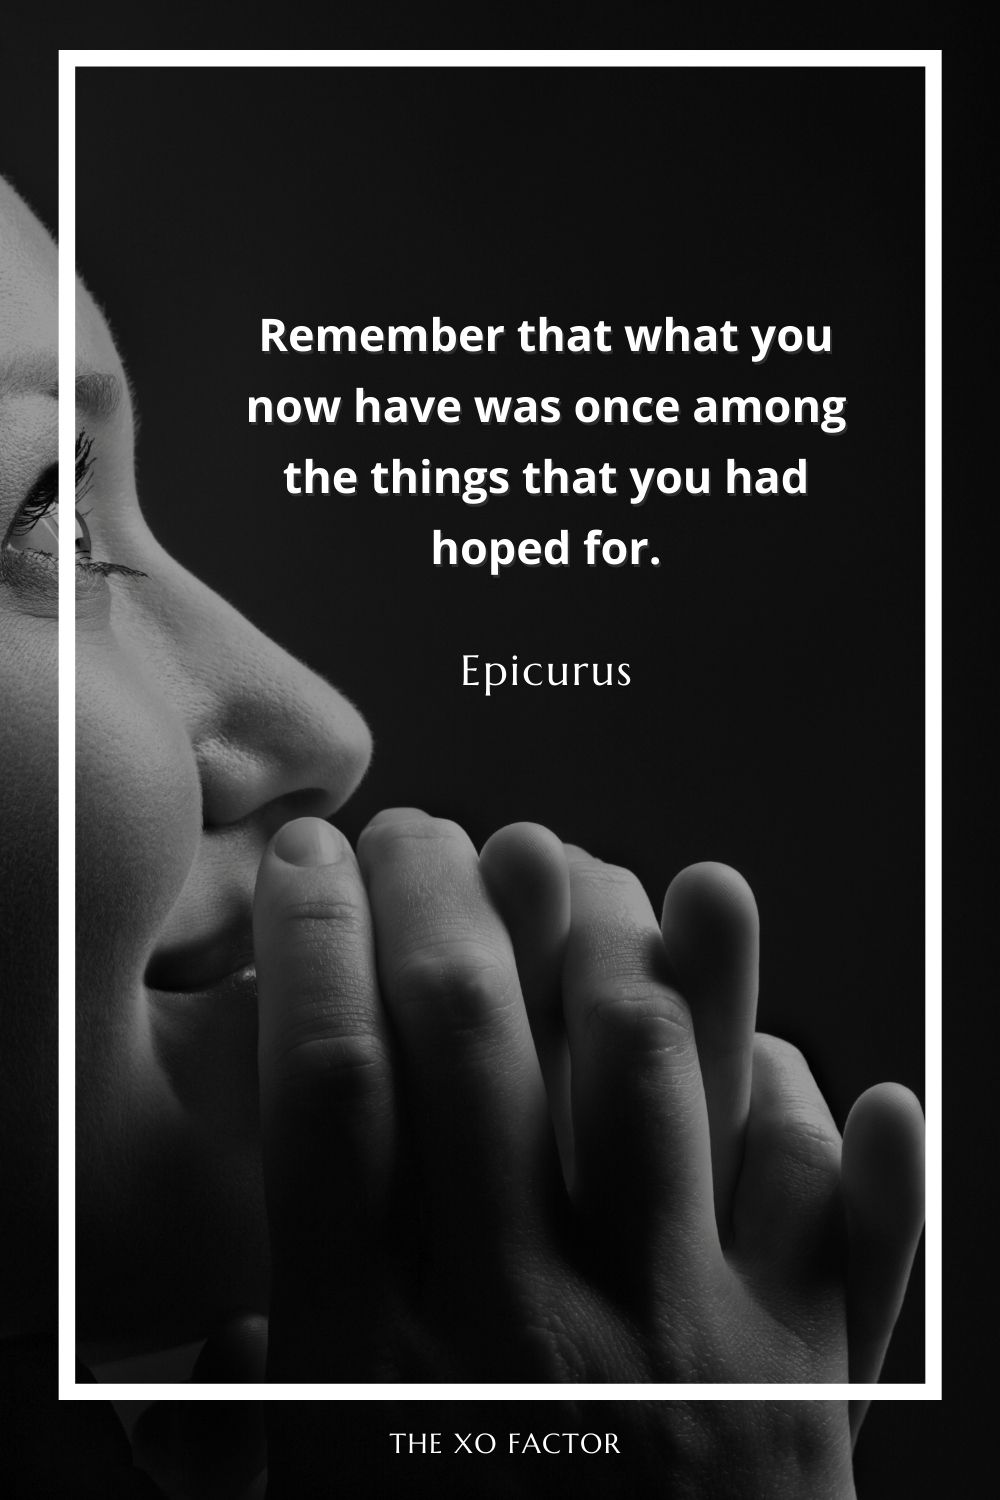 Remember that what you now have was once among the things that you had hoped for.